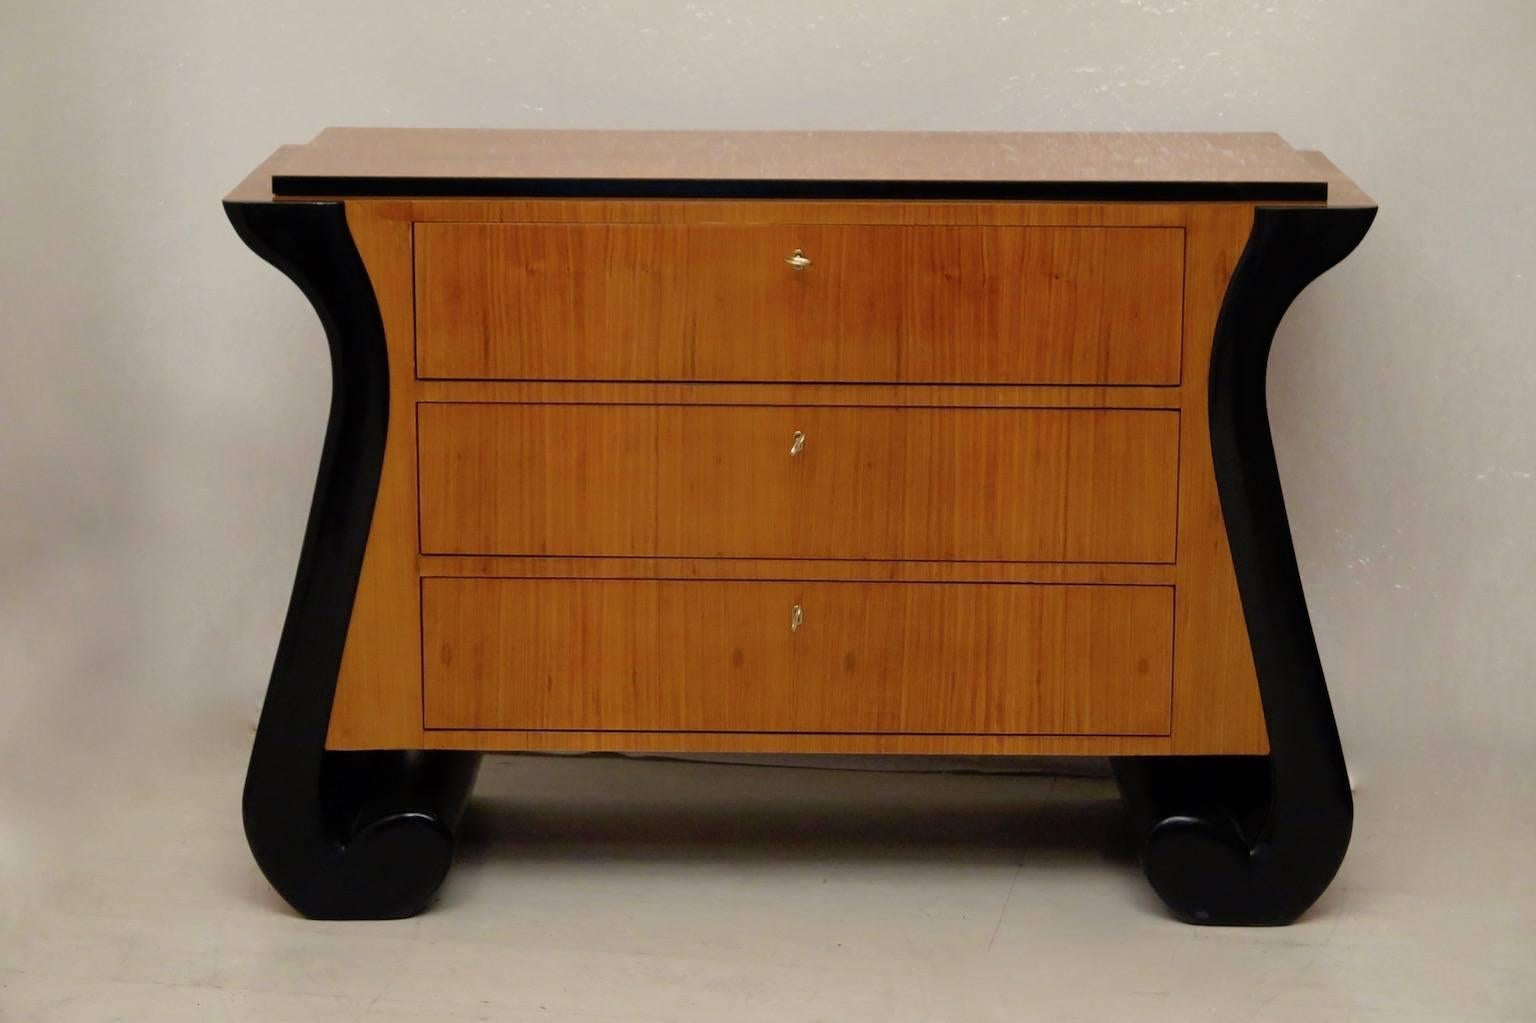 Special design for this Art Deco dresser. All veneered in cheerywood, with finishing the sides of the drawers blacks lacquered. Three very spacious drawers. Very beautiful the big black commas simulating the legs.